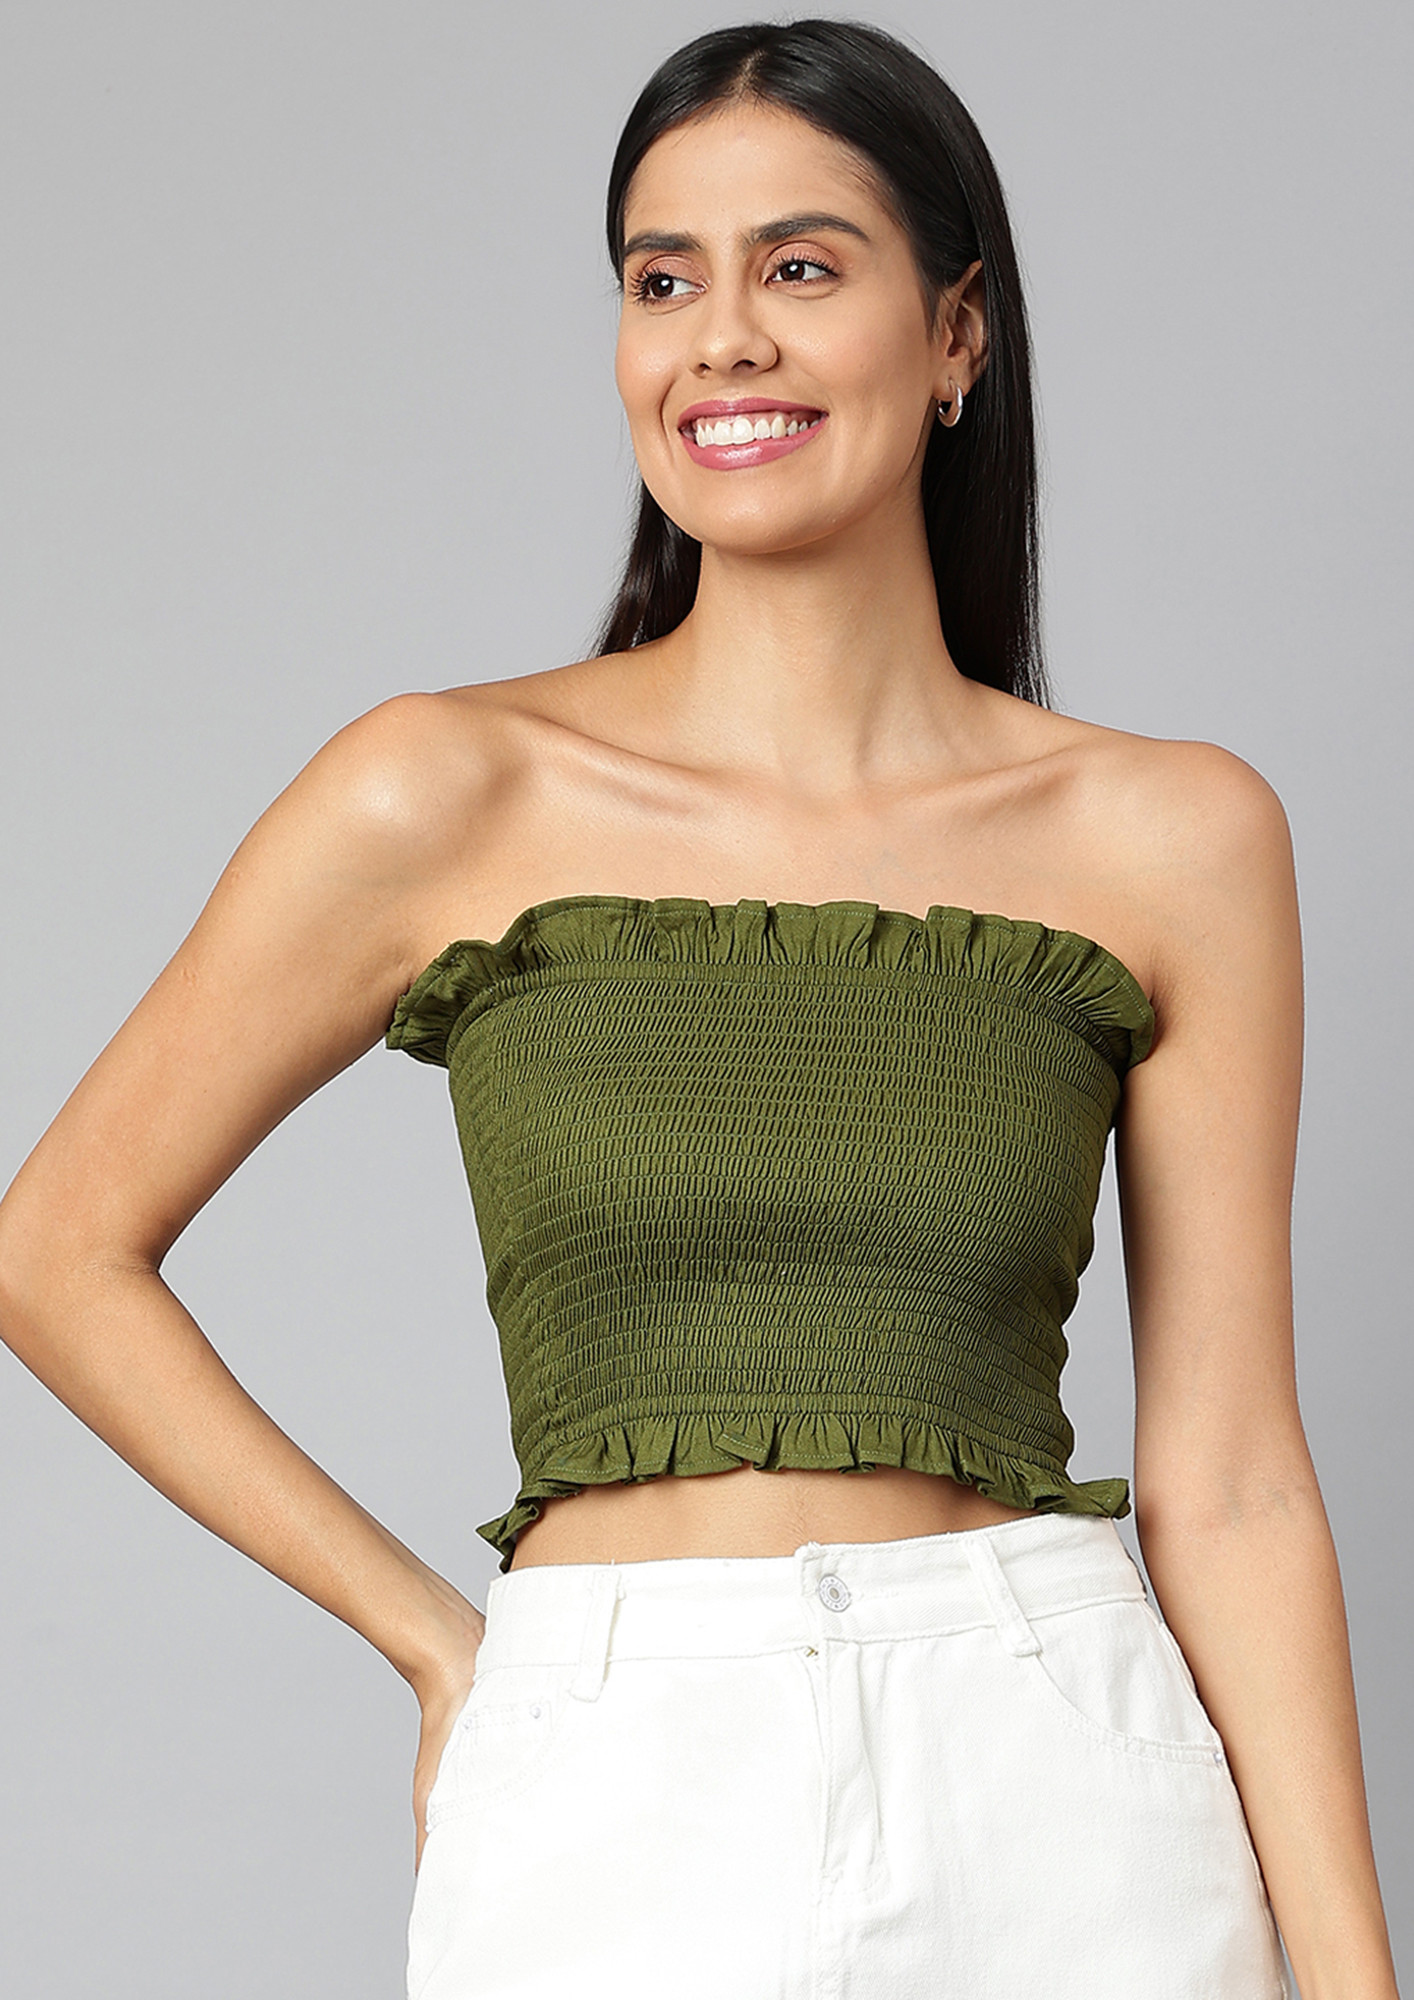 FINSBURY LONDON TUBE TOP - OLIVE